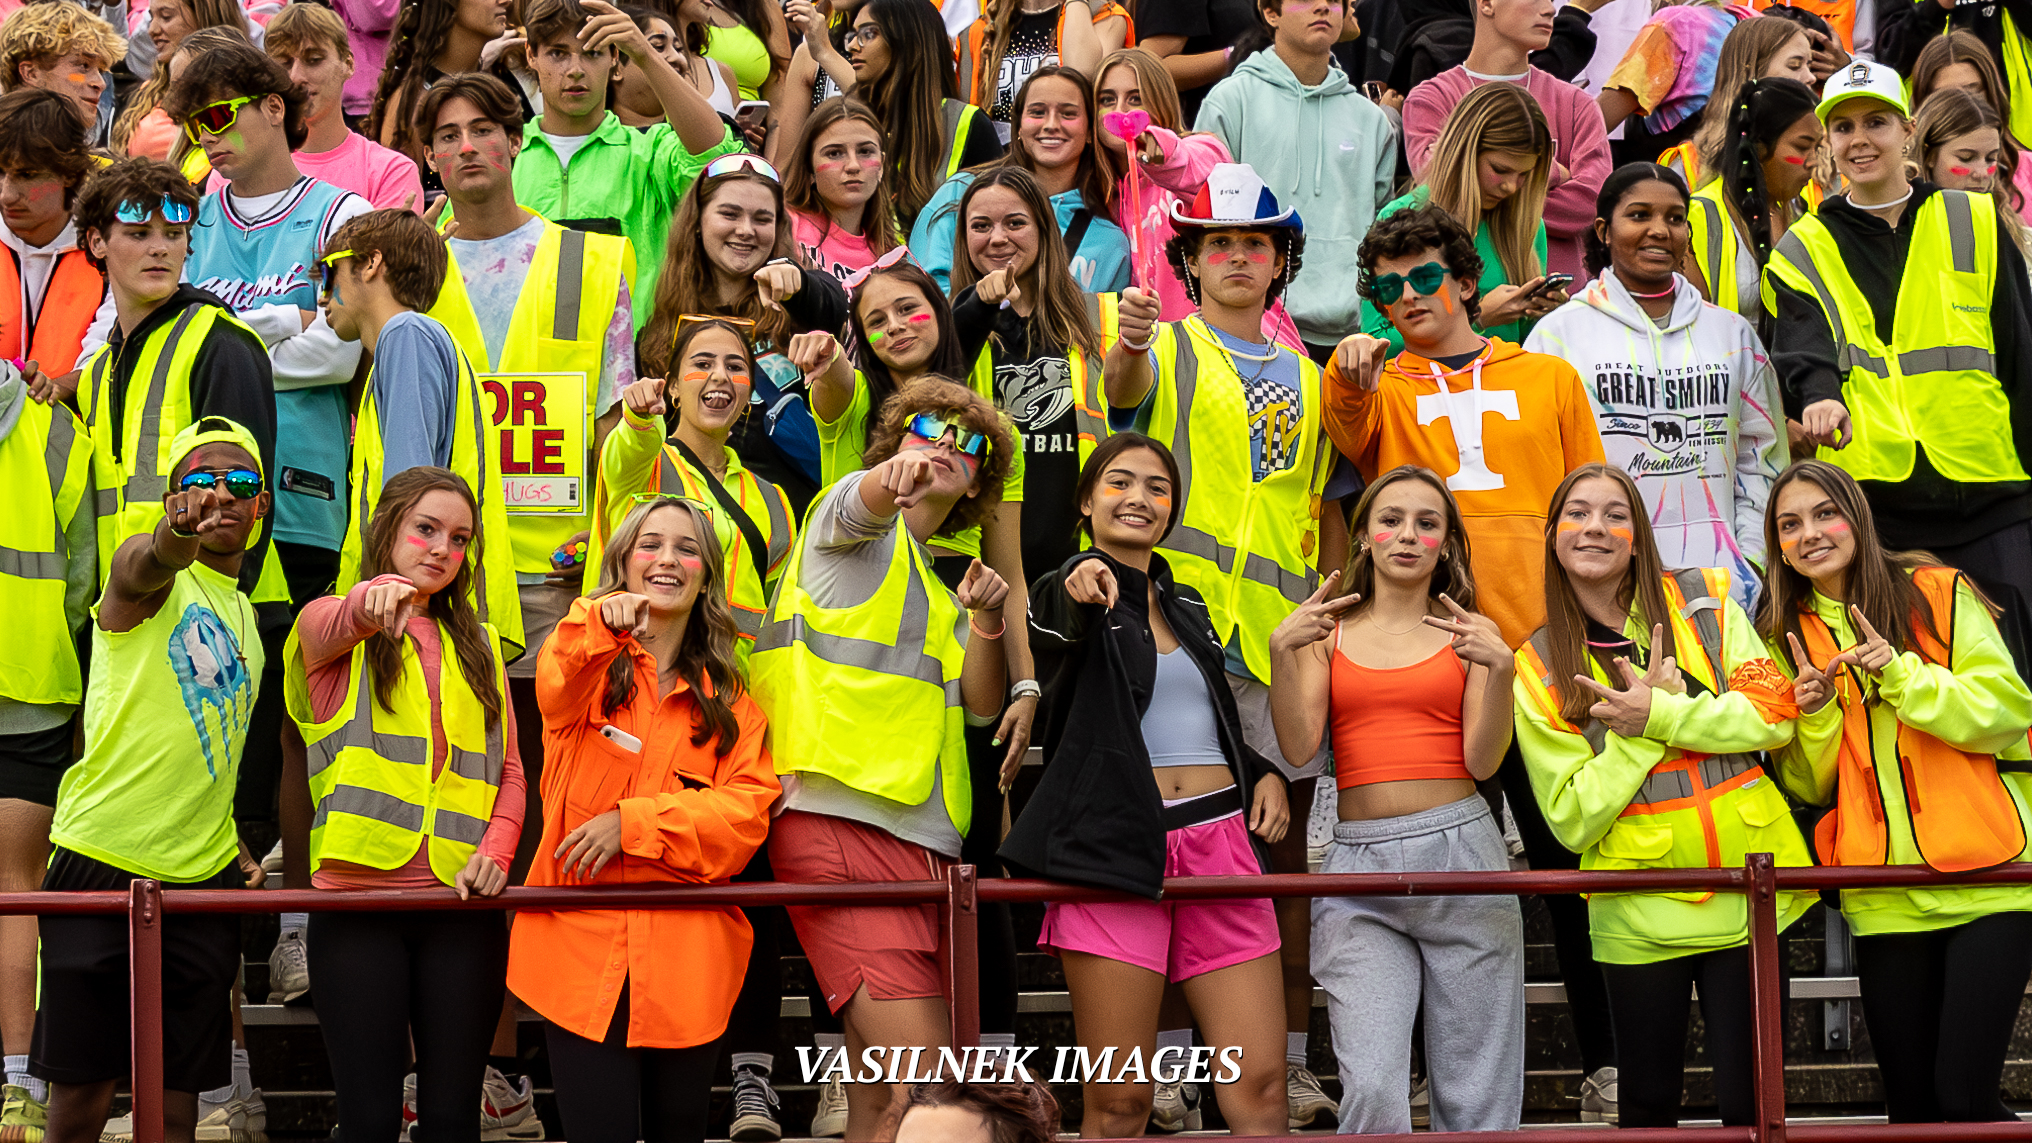 The Plymouth student cheering section represented the Wildcats well at the game played at Westland John Glenn High School